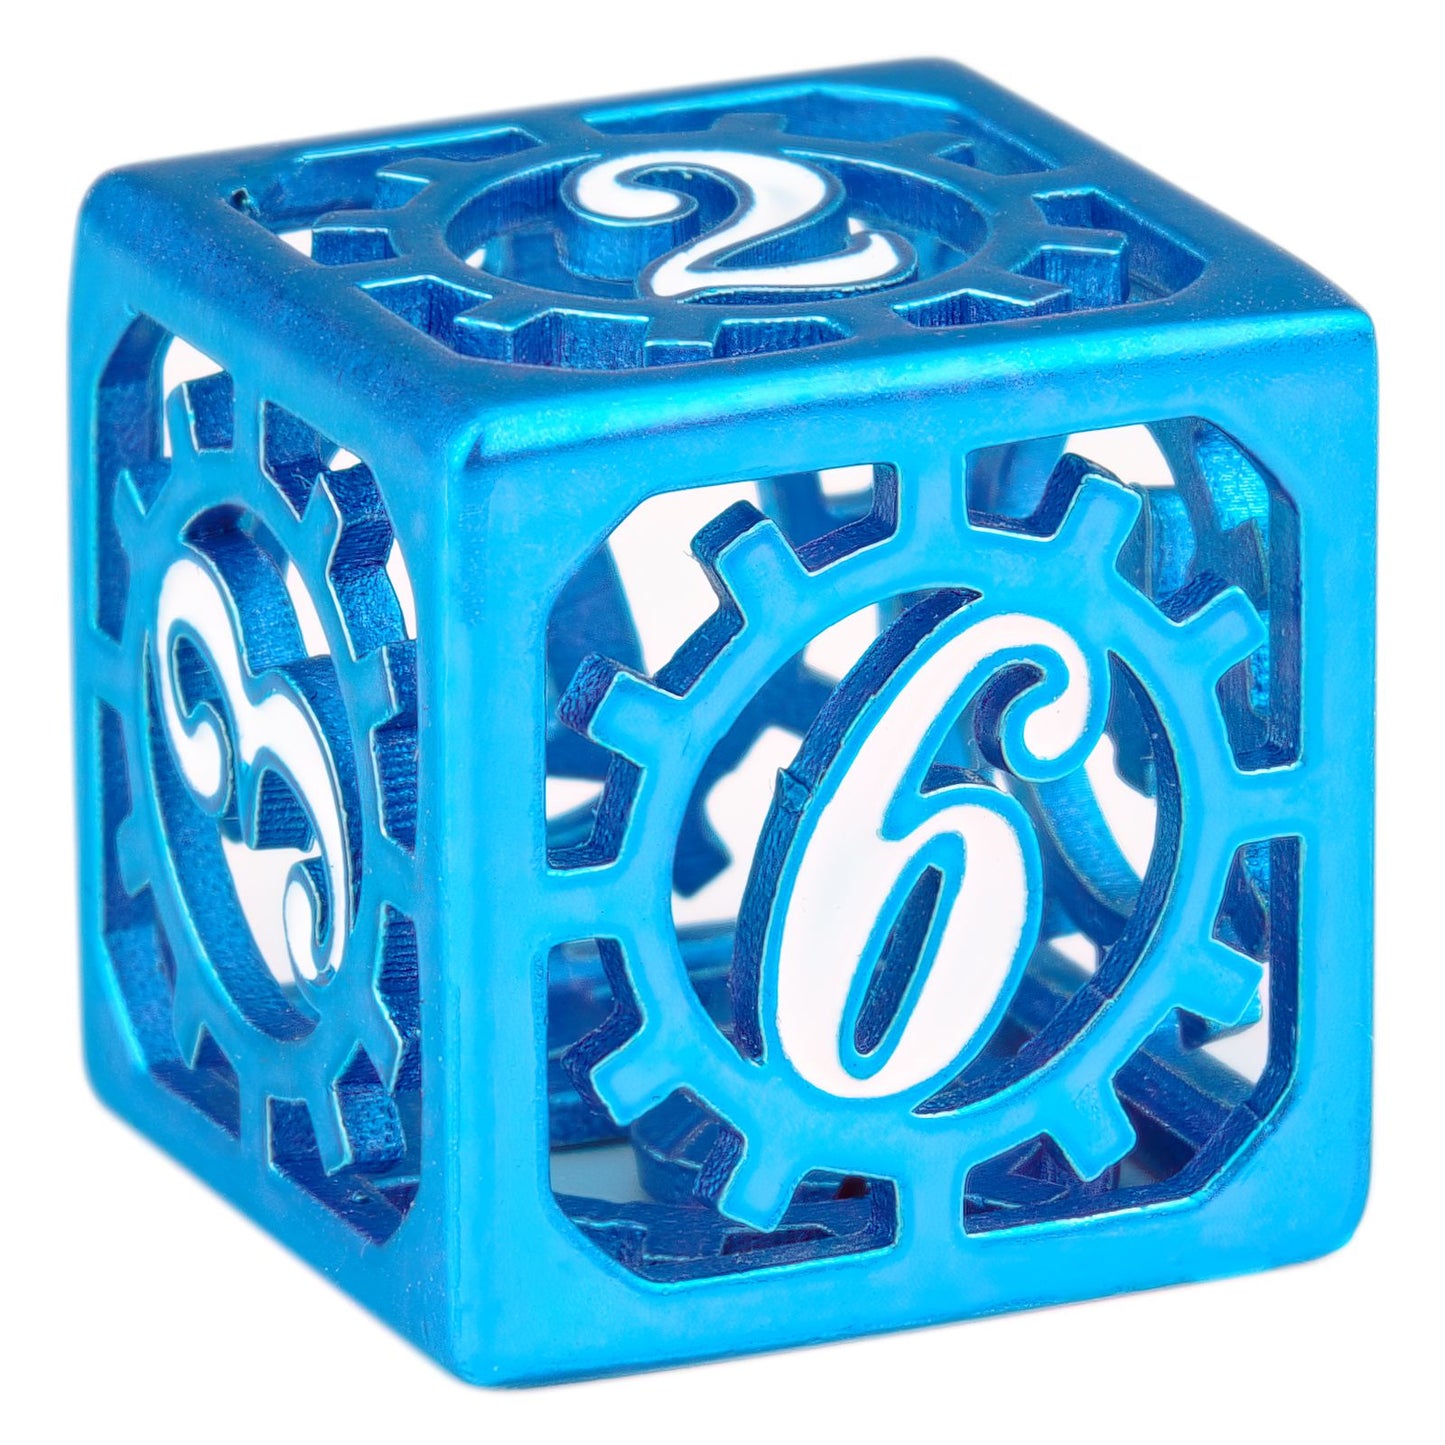 Peacock blue dnd dice set with hollow steampunk gear cage design - HYMGHO Dice 